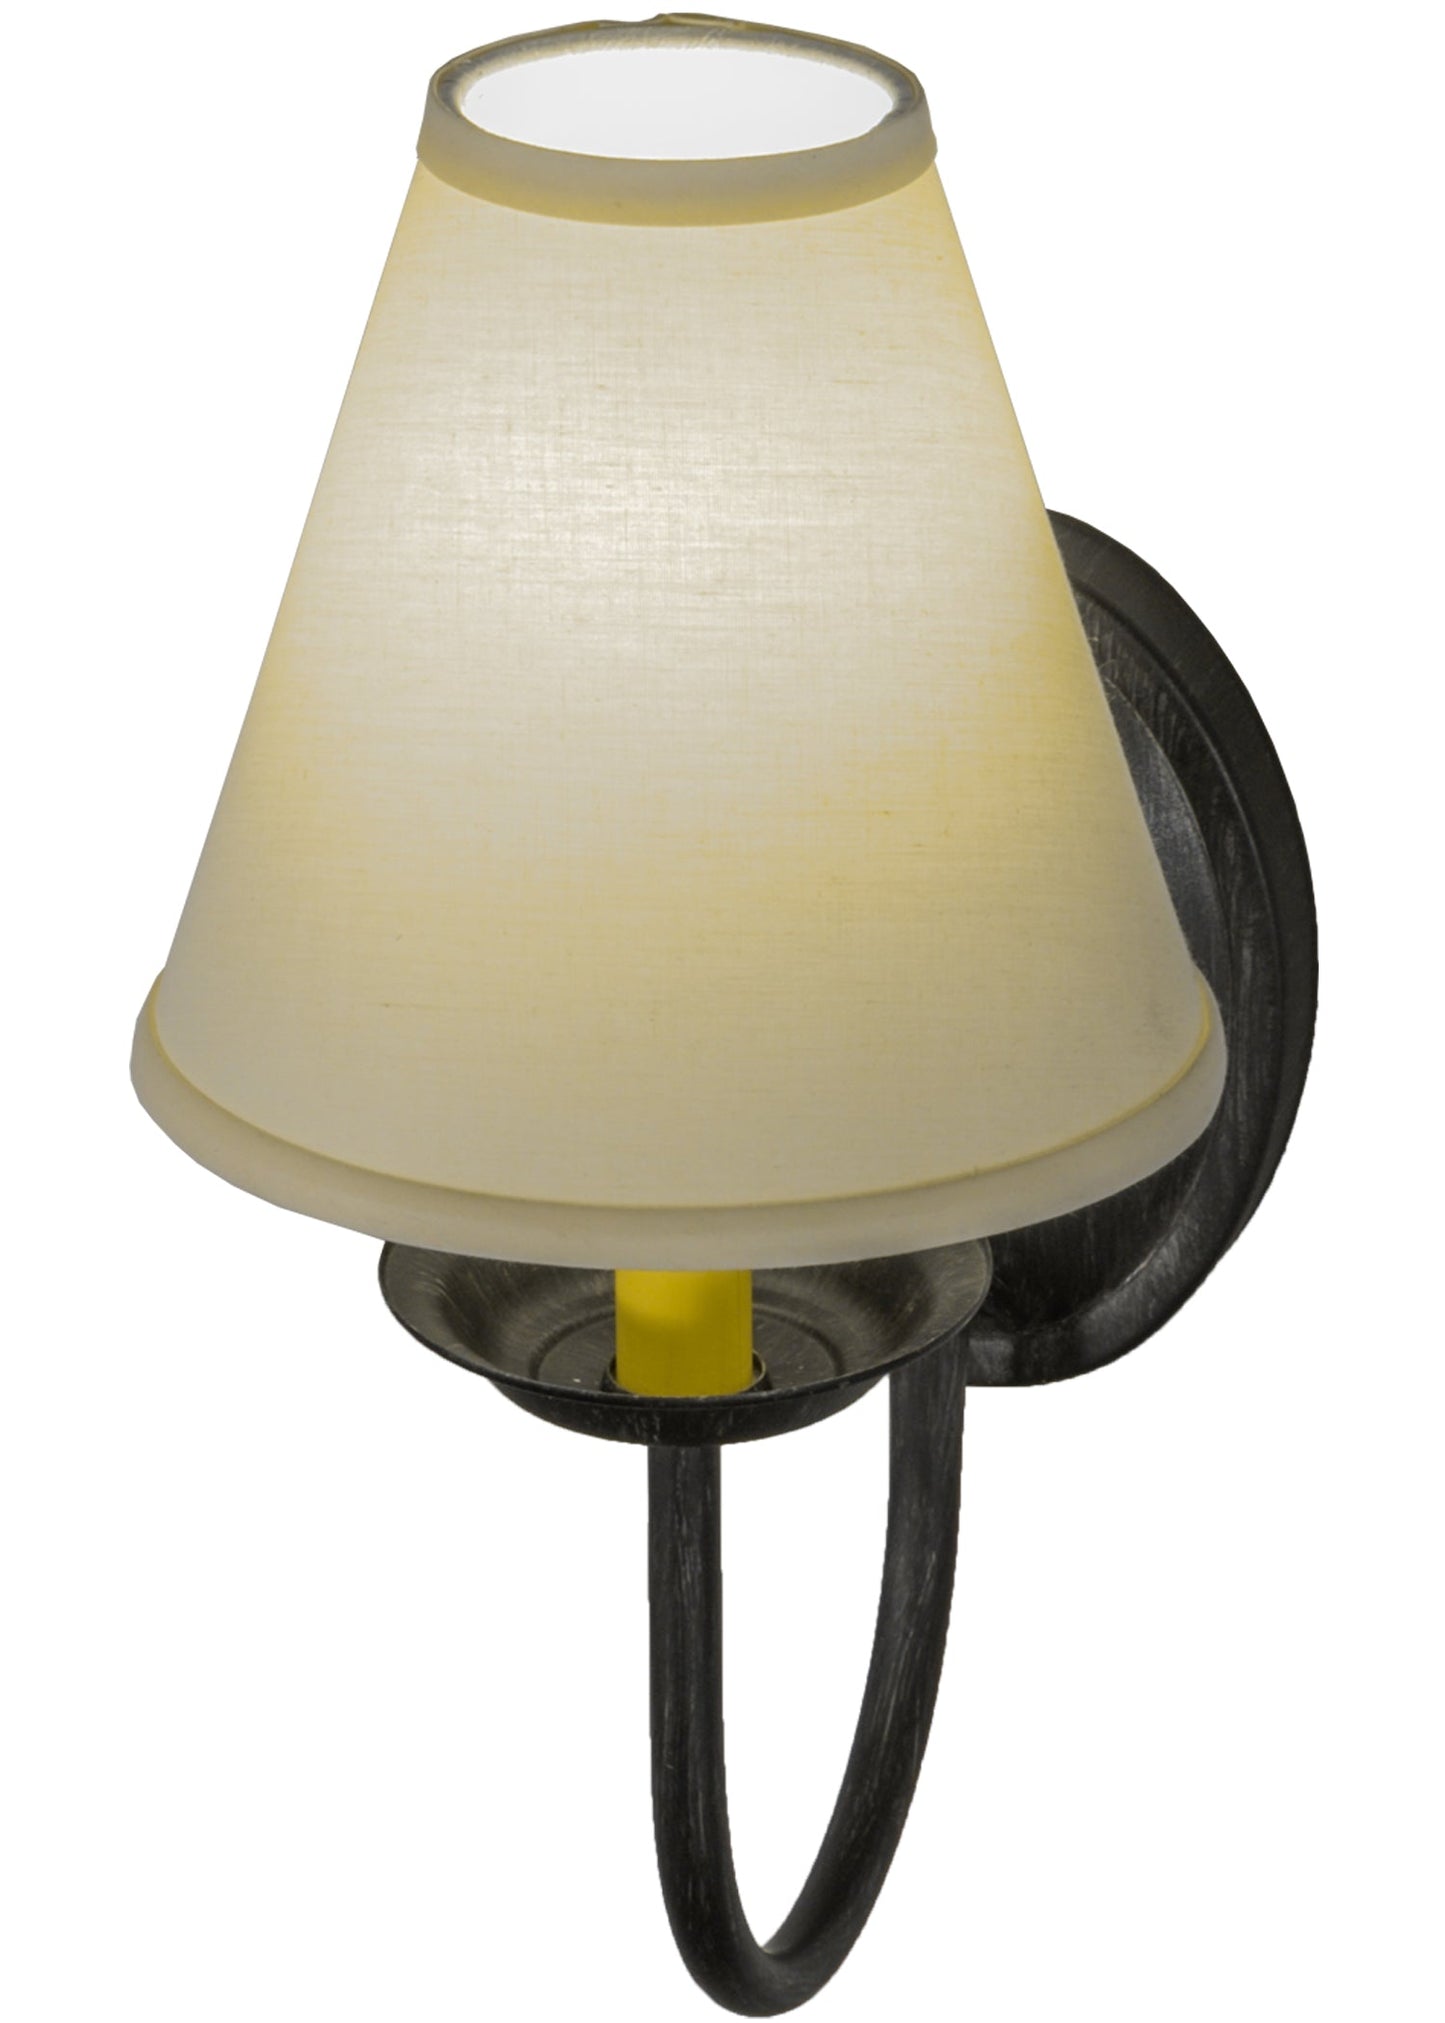 7" Classic Fabric Shade Wall Sconce by 2nd Ave Lighting